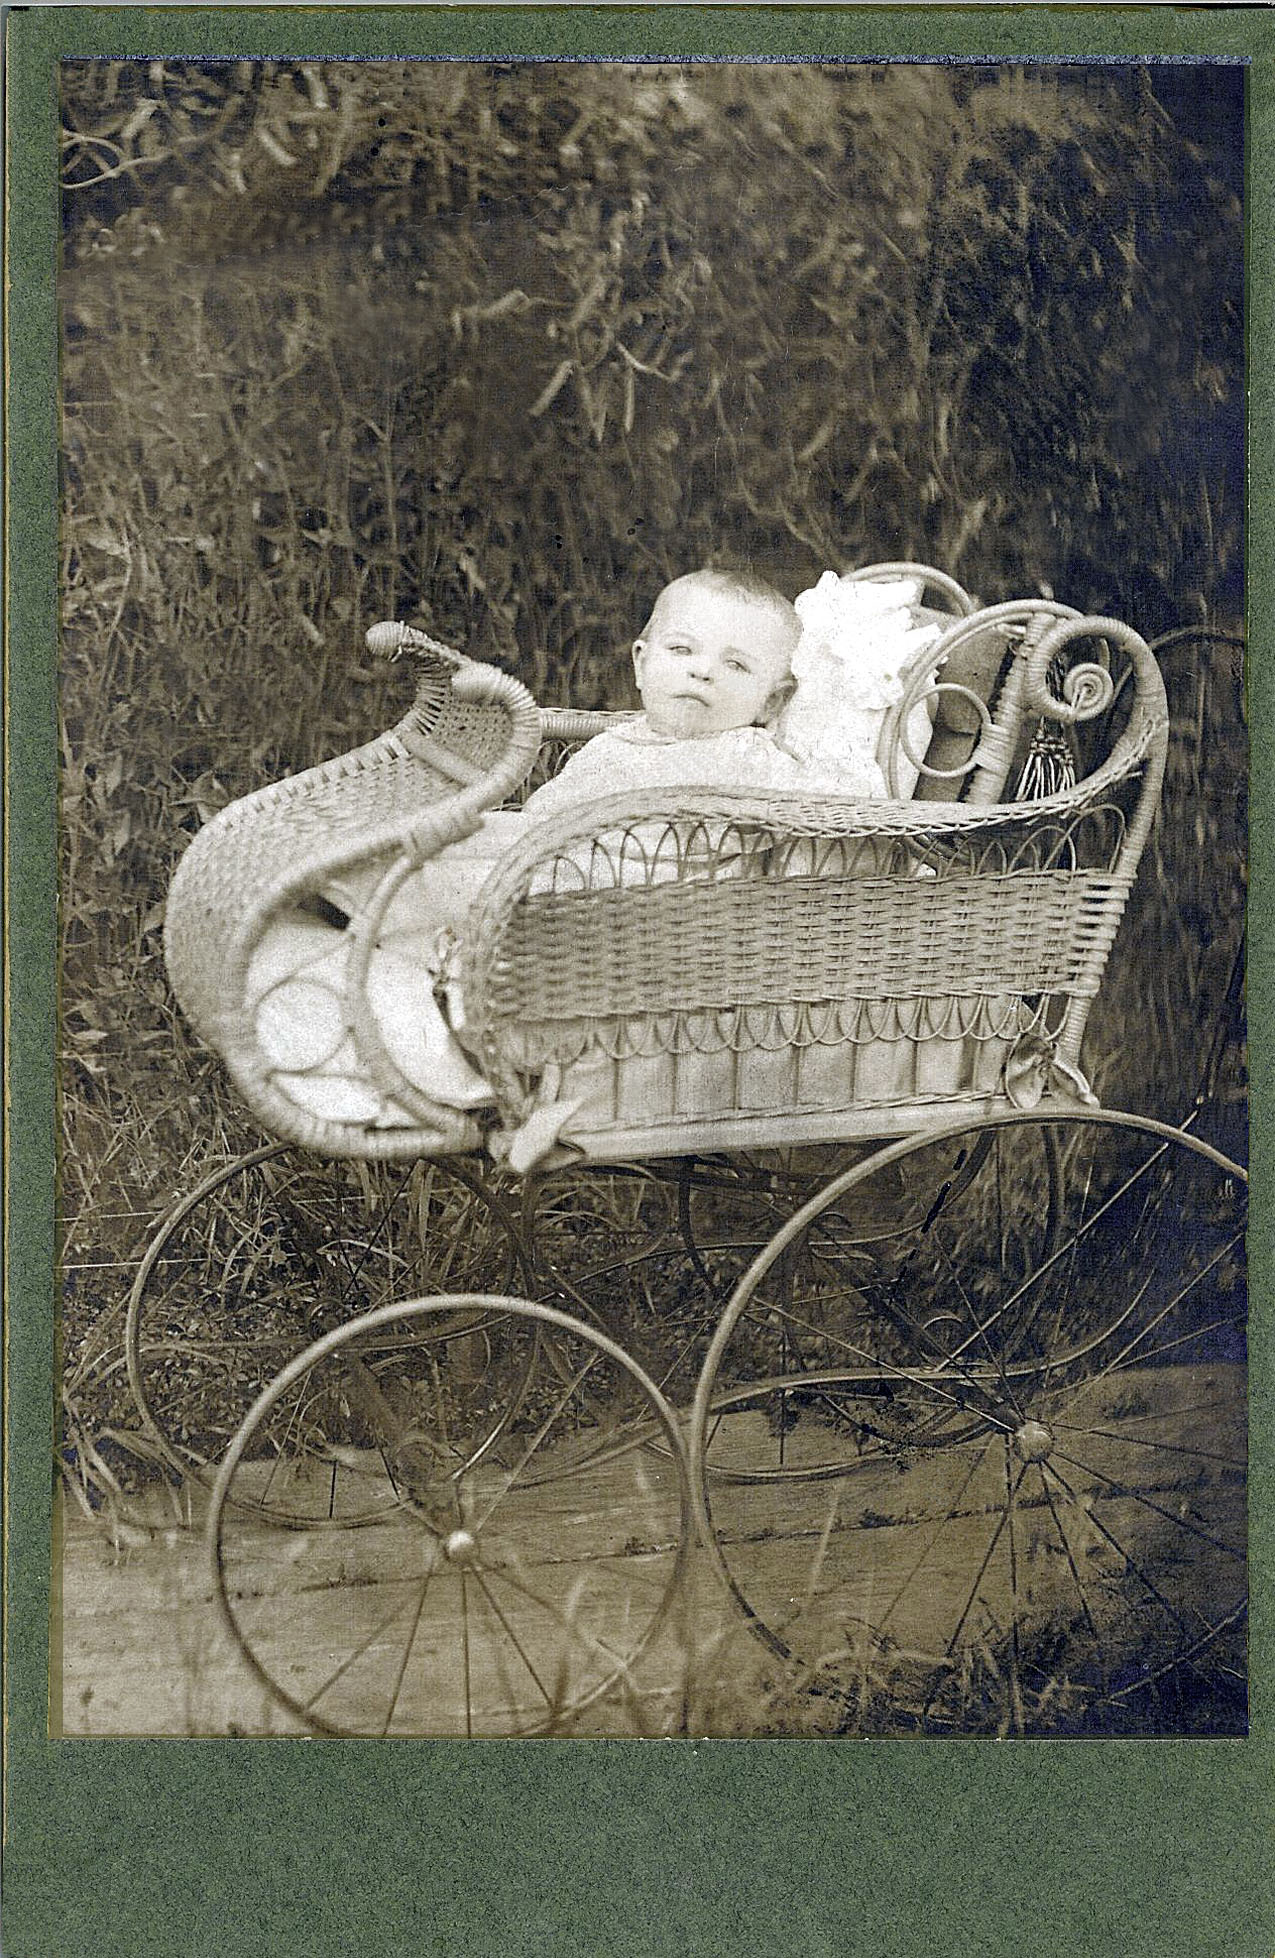 Photo of Frances Josephine Kirkland as a baby in her wicker carriage.